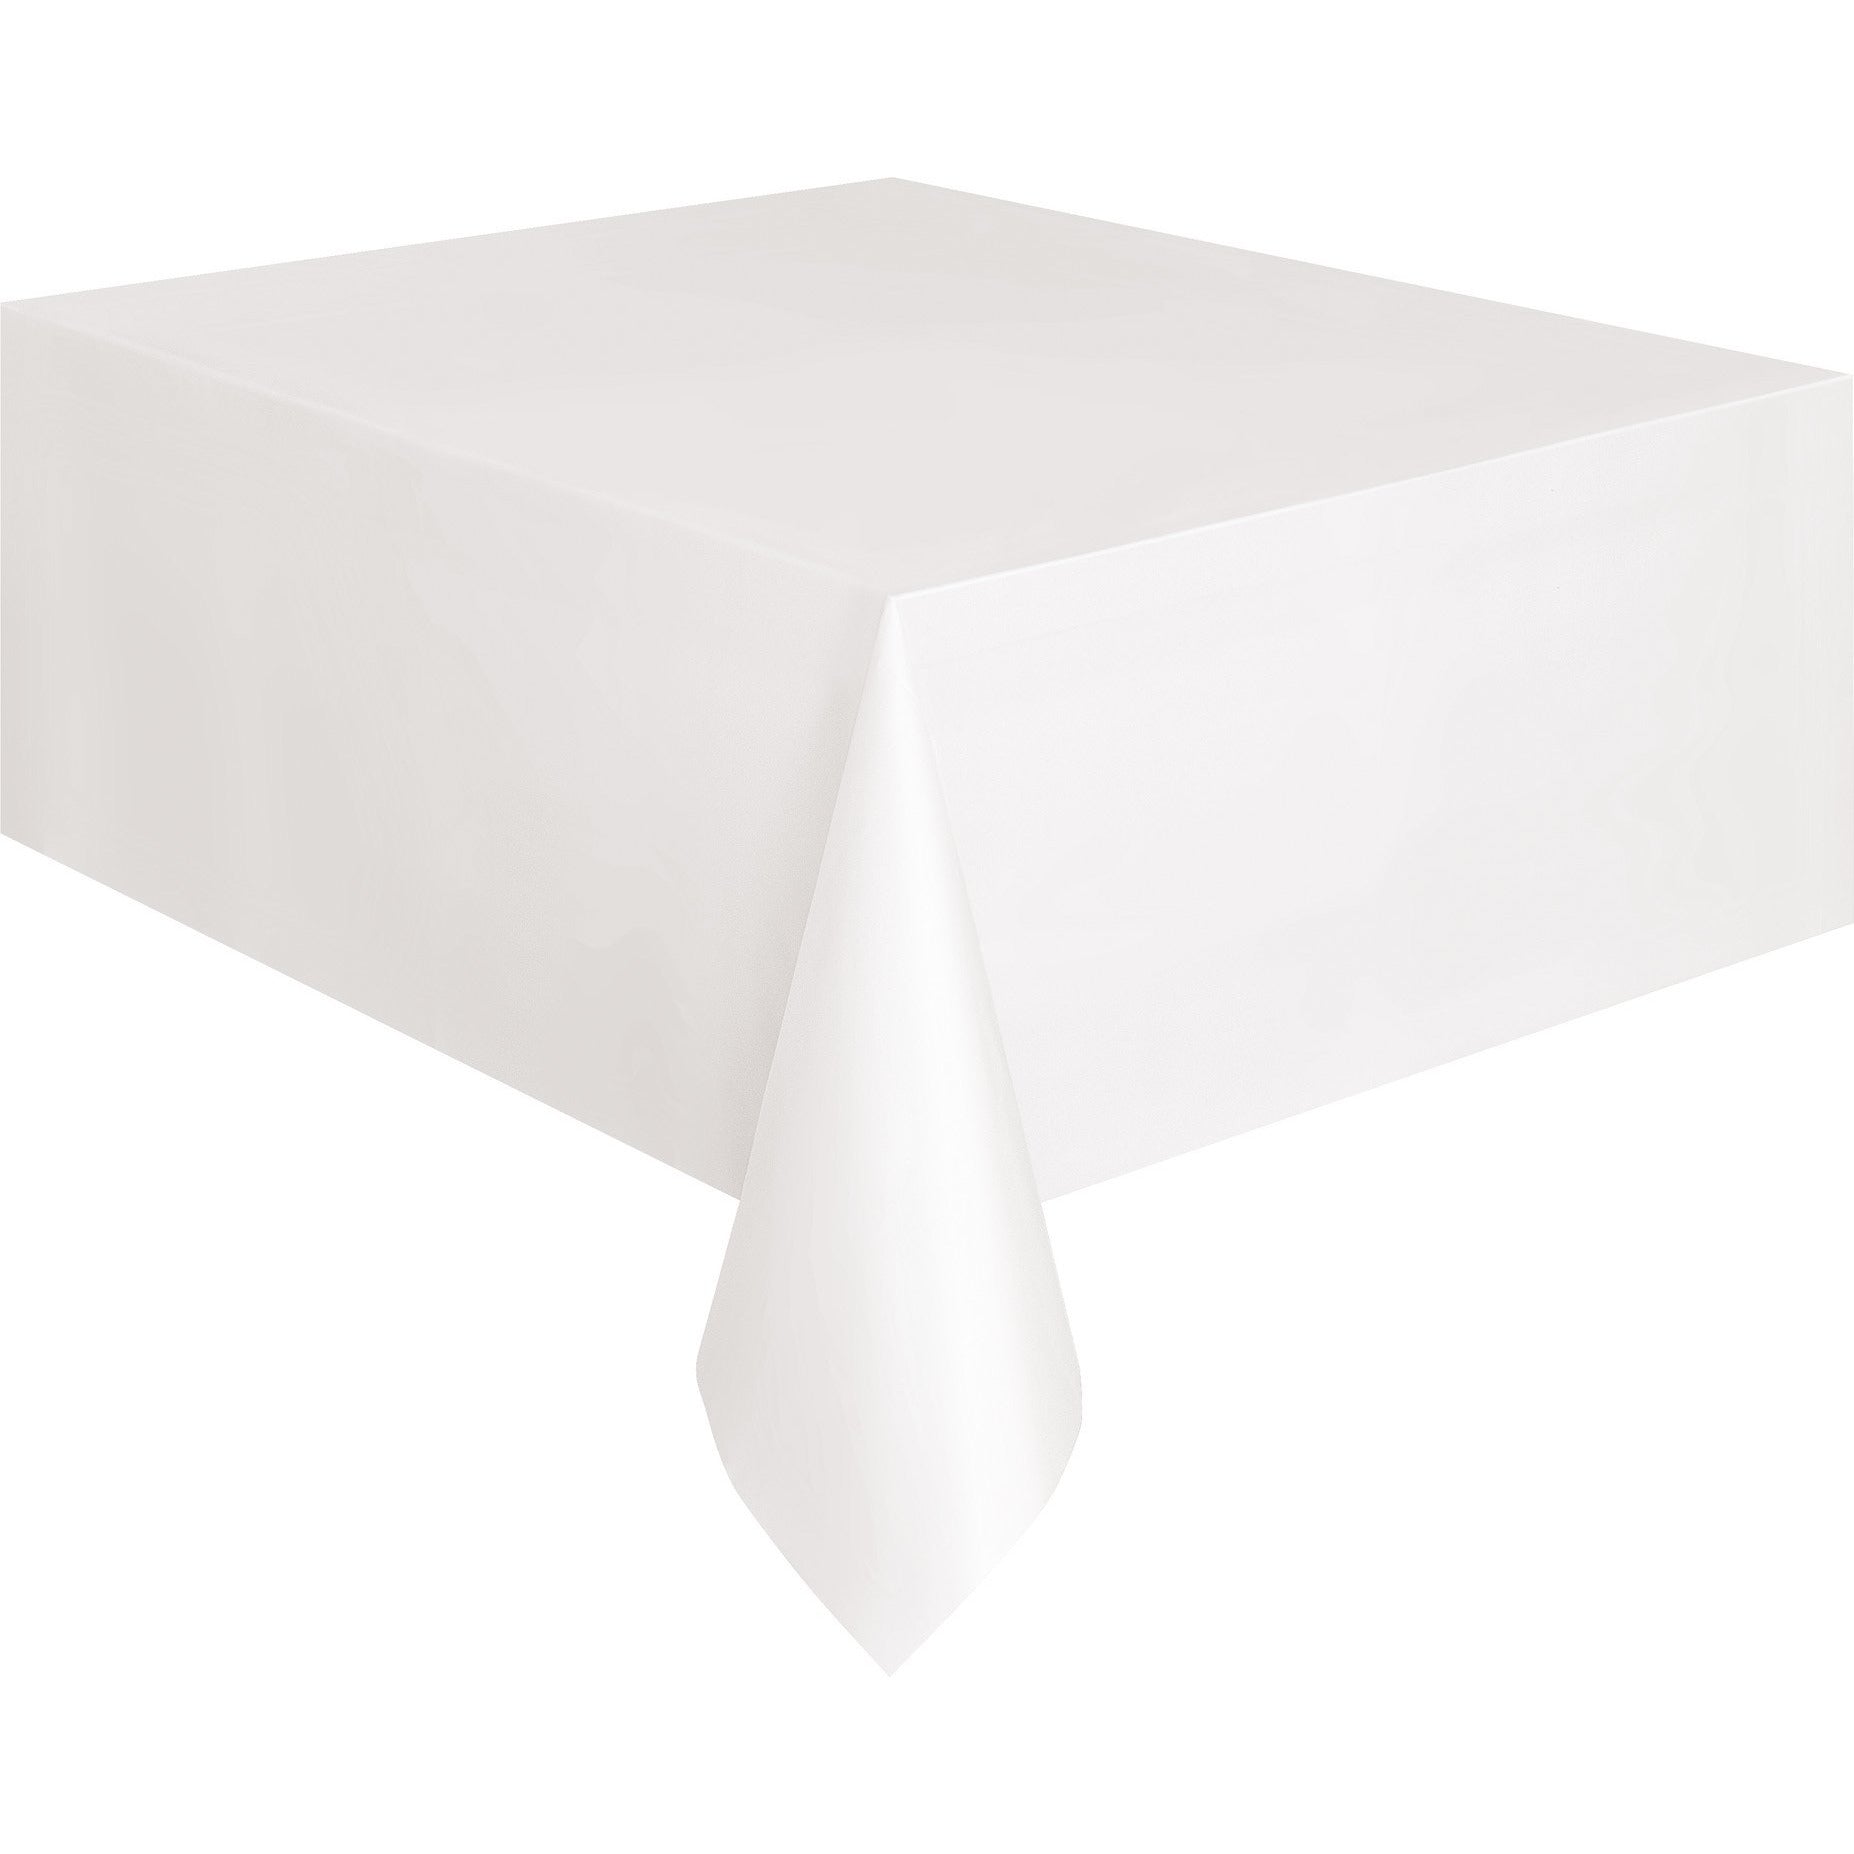 Plastic Tablecover - White - Dollars and Sense